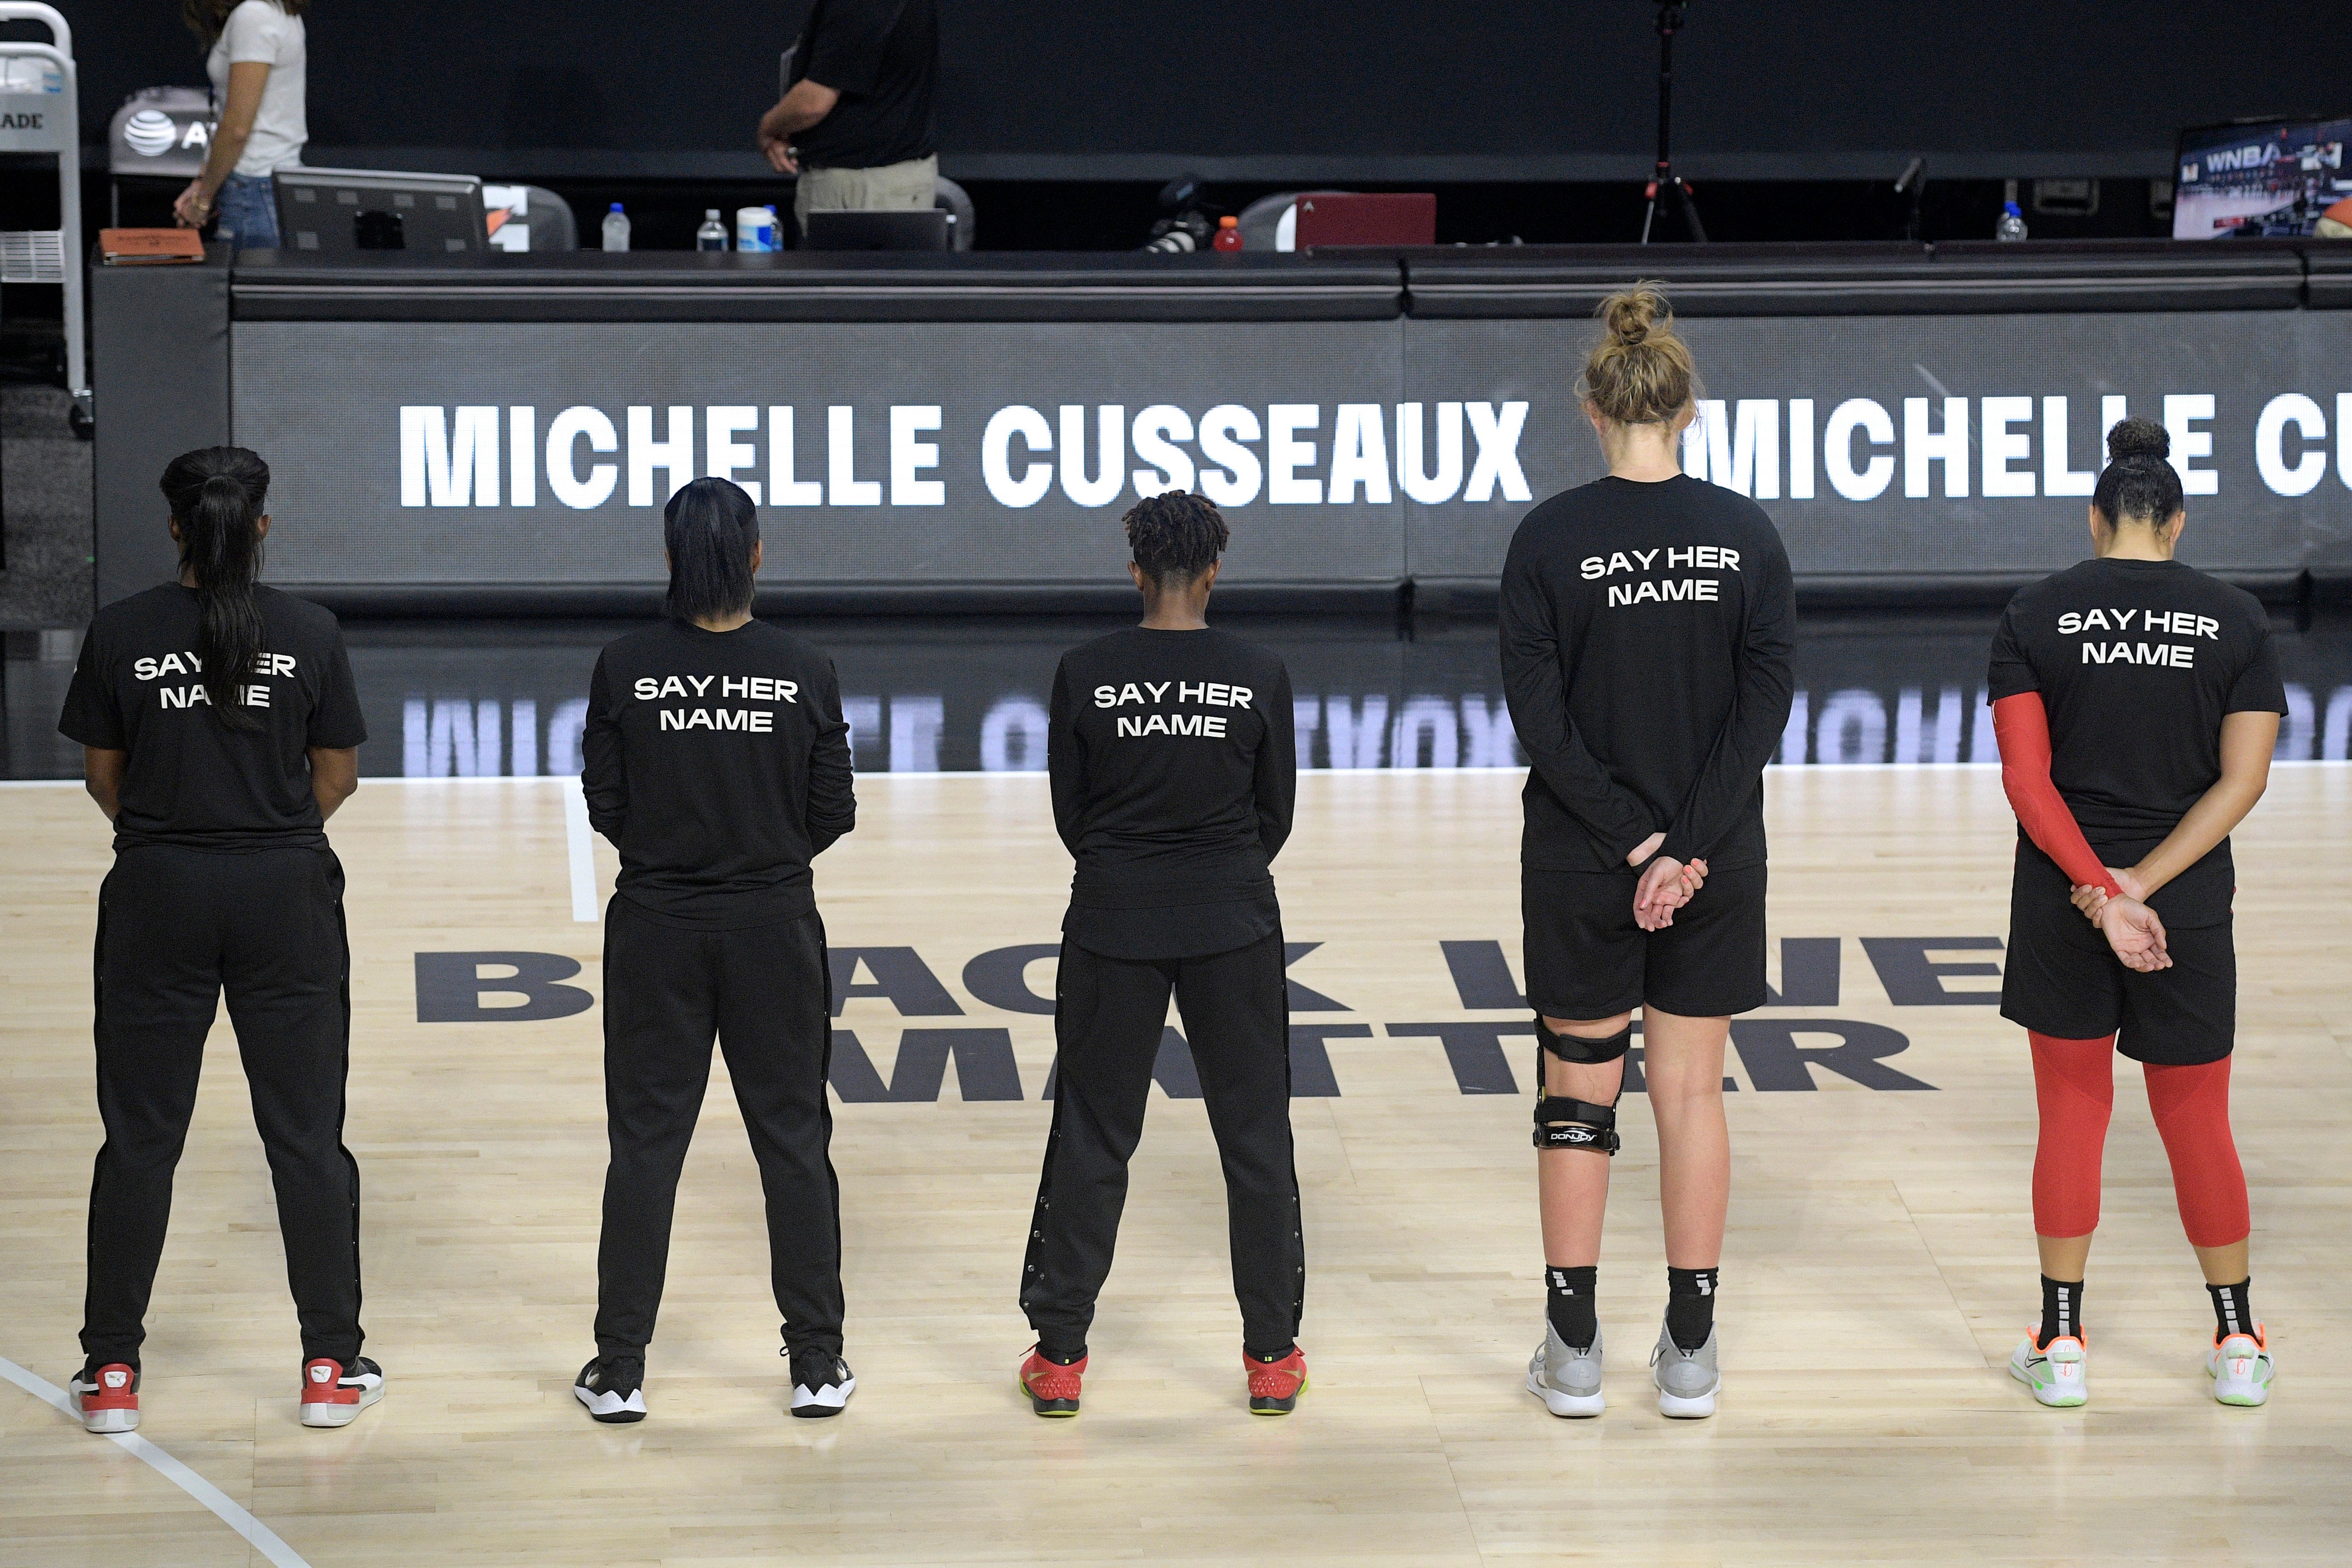 Members of the Las Vegas Aces honor Michelle Cusseaux with a moment of silence before a WNBA basketball game against the Washington Mystics, Aug. 15, 2020, in Bradenton, Fla.